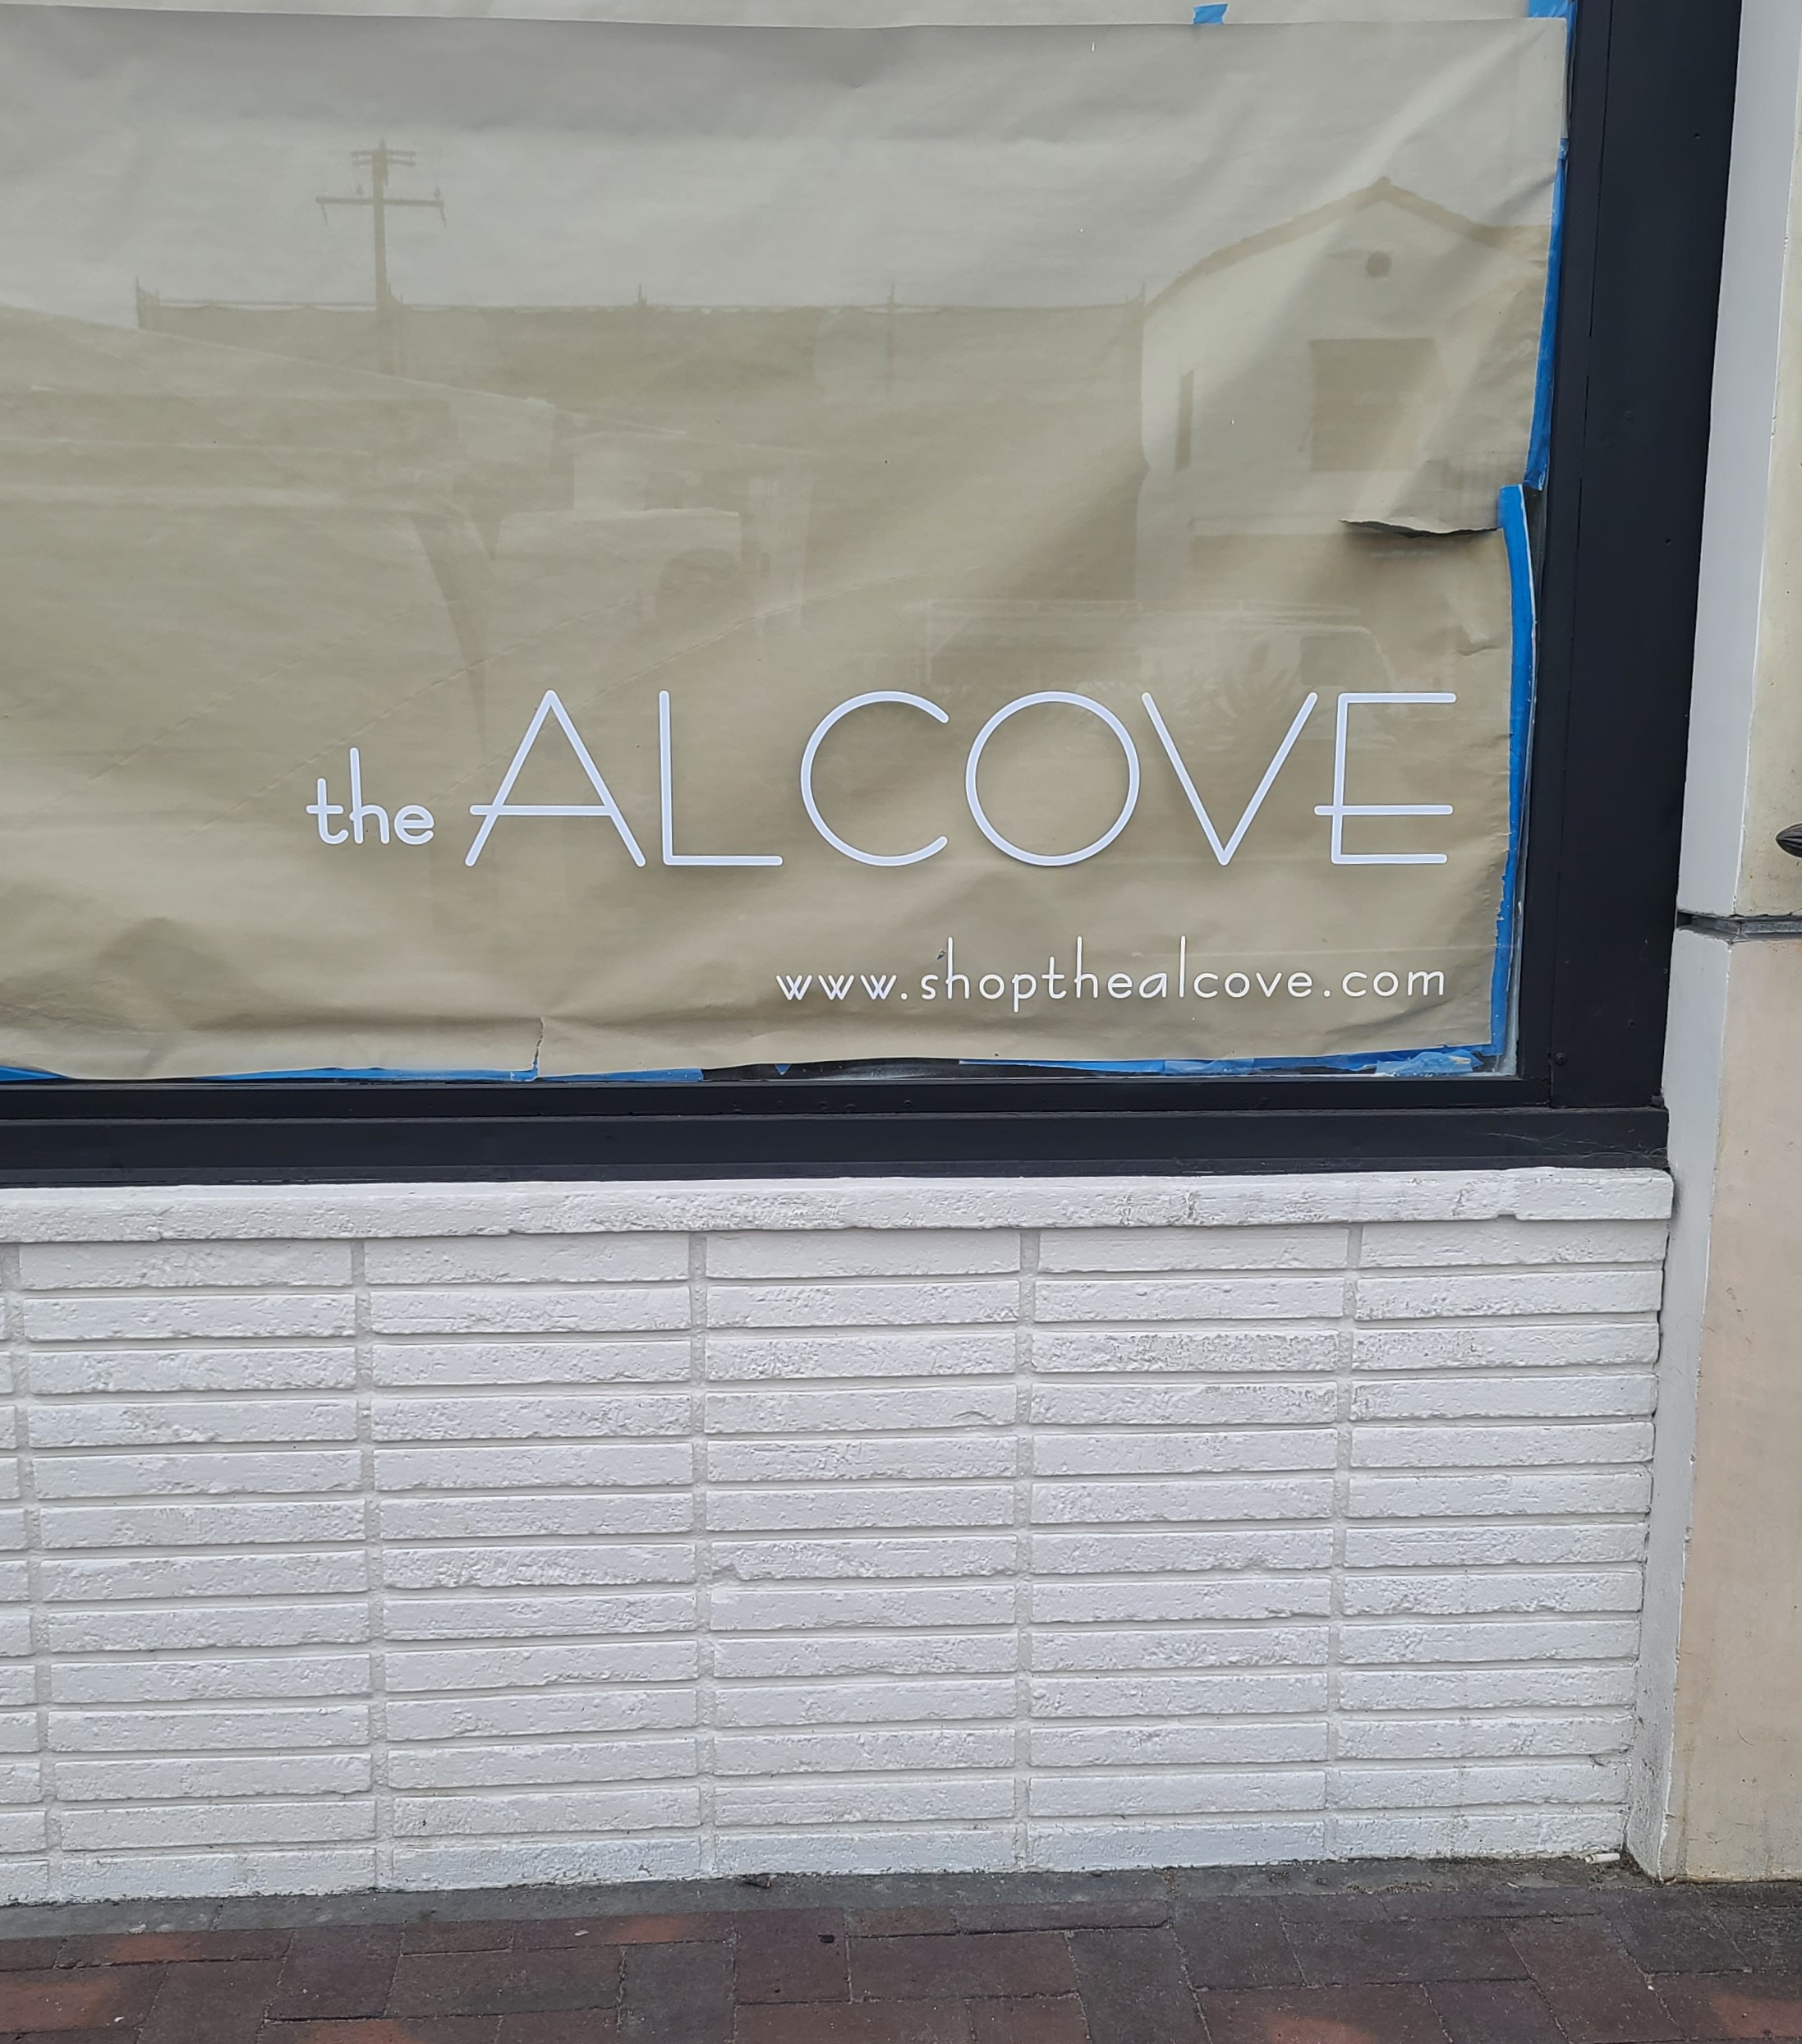 You are currently viewing Storefront Window Graphics for The Alcove in Long Beach